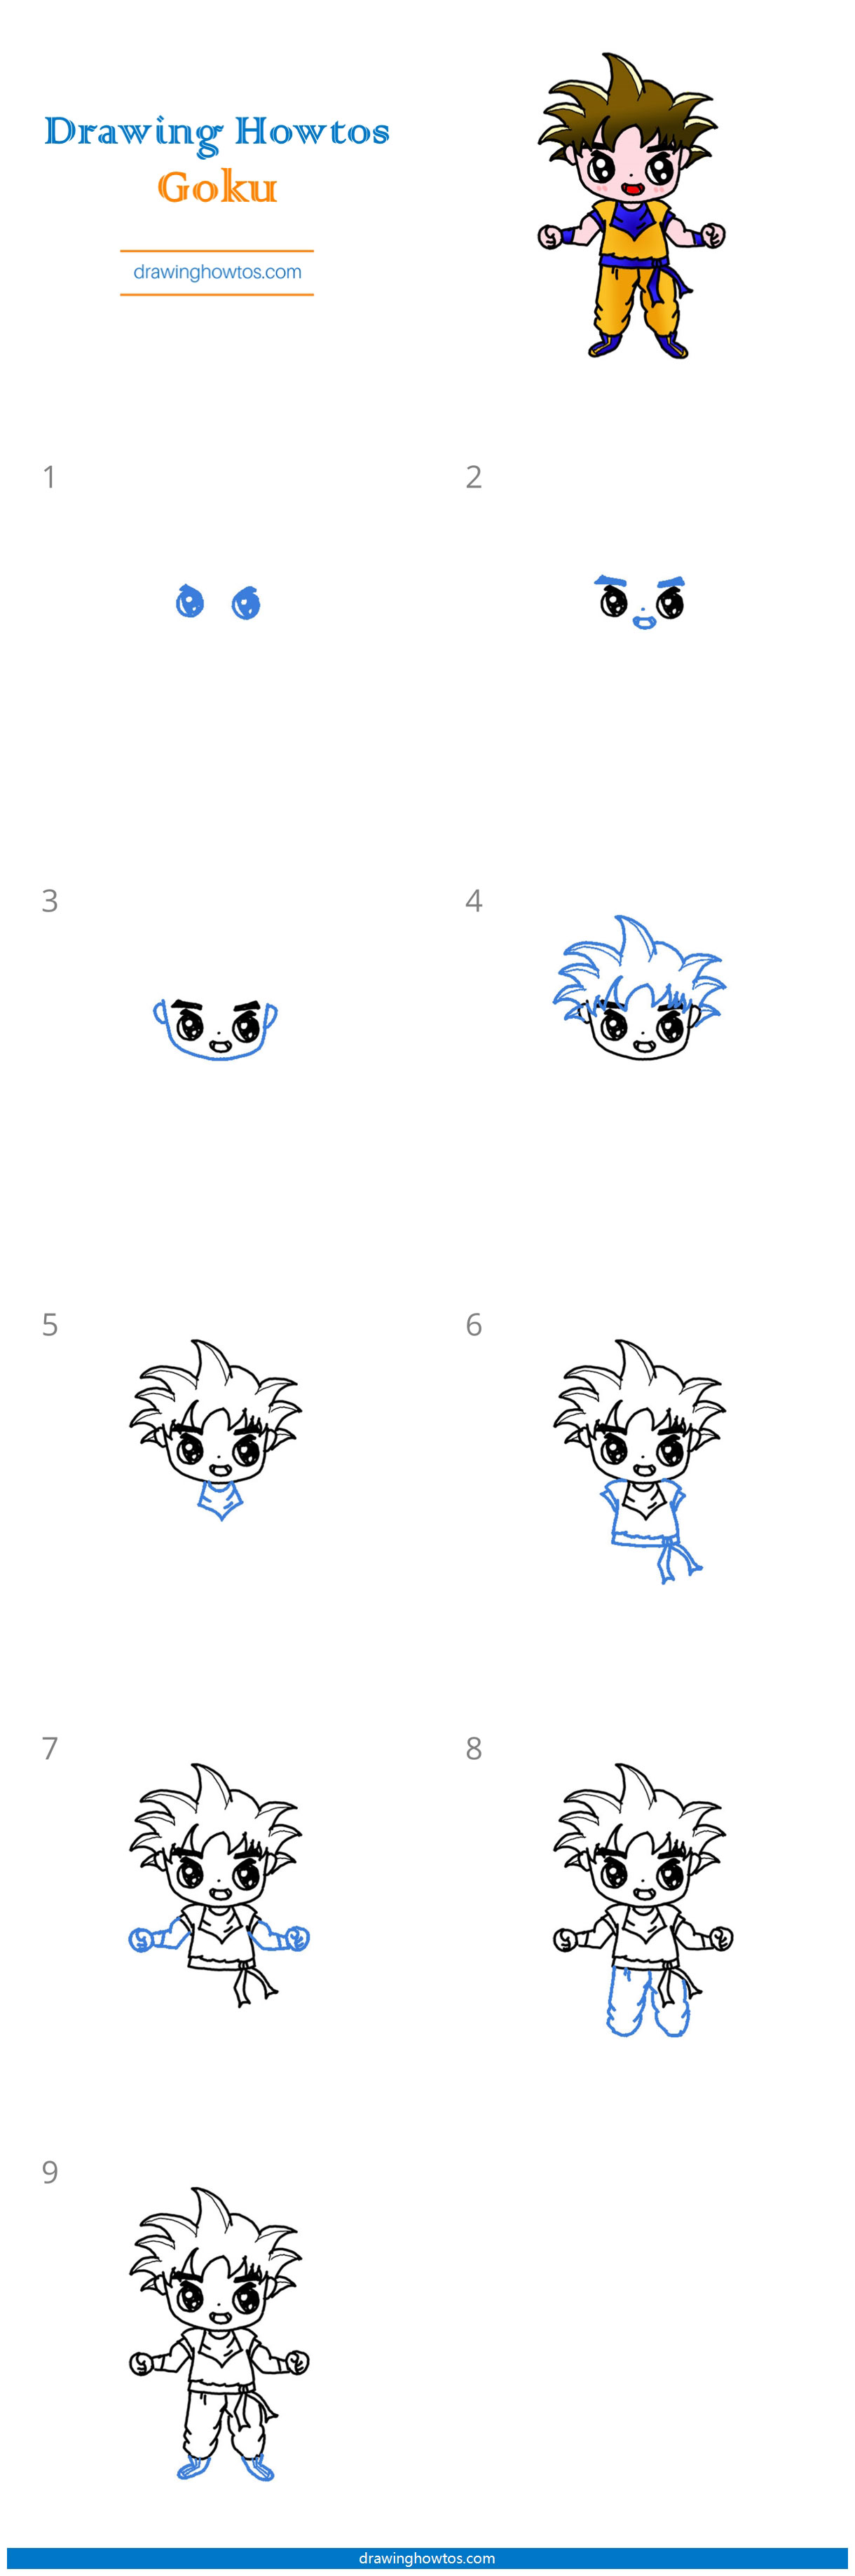 How to Draw Goku from DragonBall Step by Step